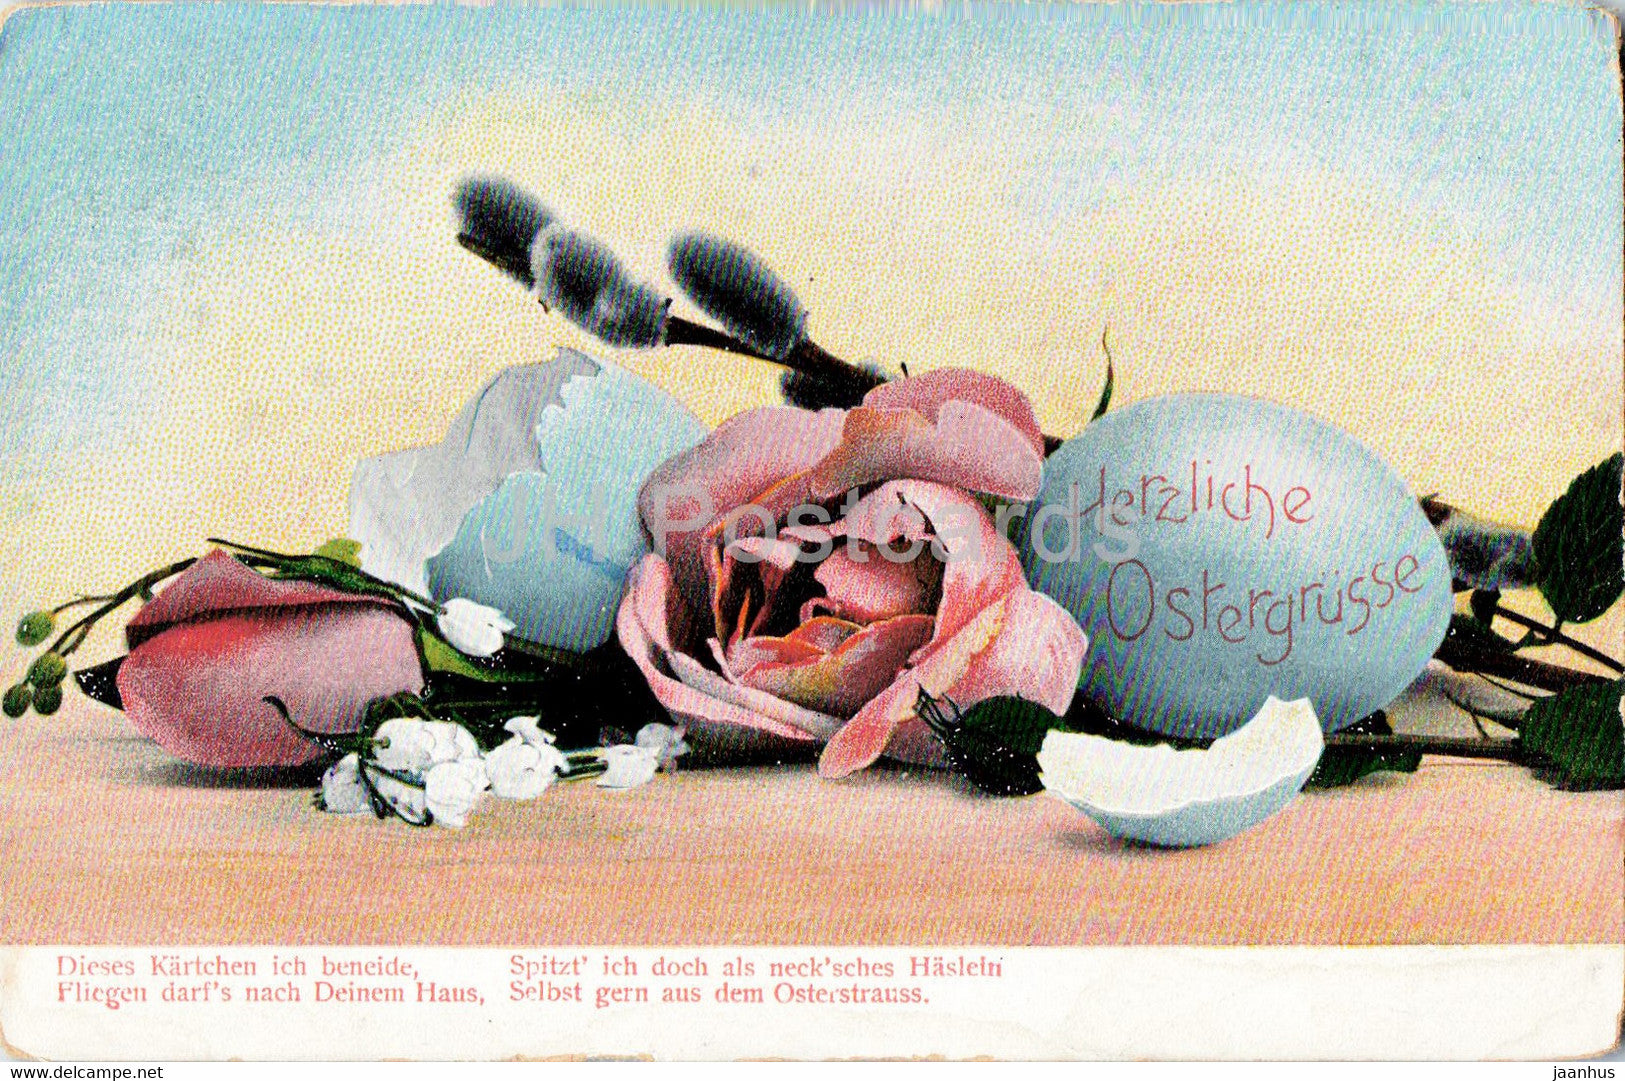 Easter Greeting Card - Herzliche Ostergrusse - Disese Kartchen ich beneide - Serie 199 - old postcard - Germany - used - JH Postcards